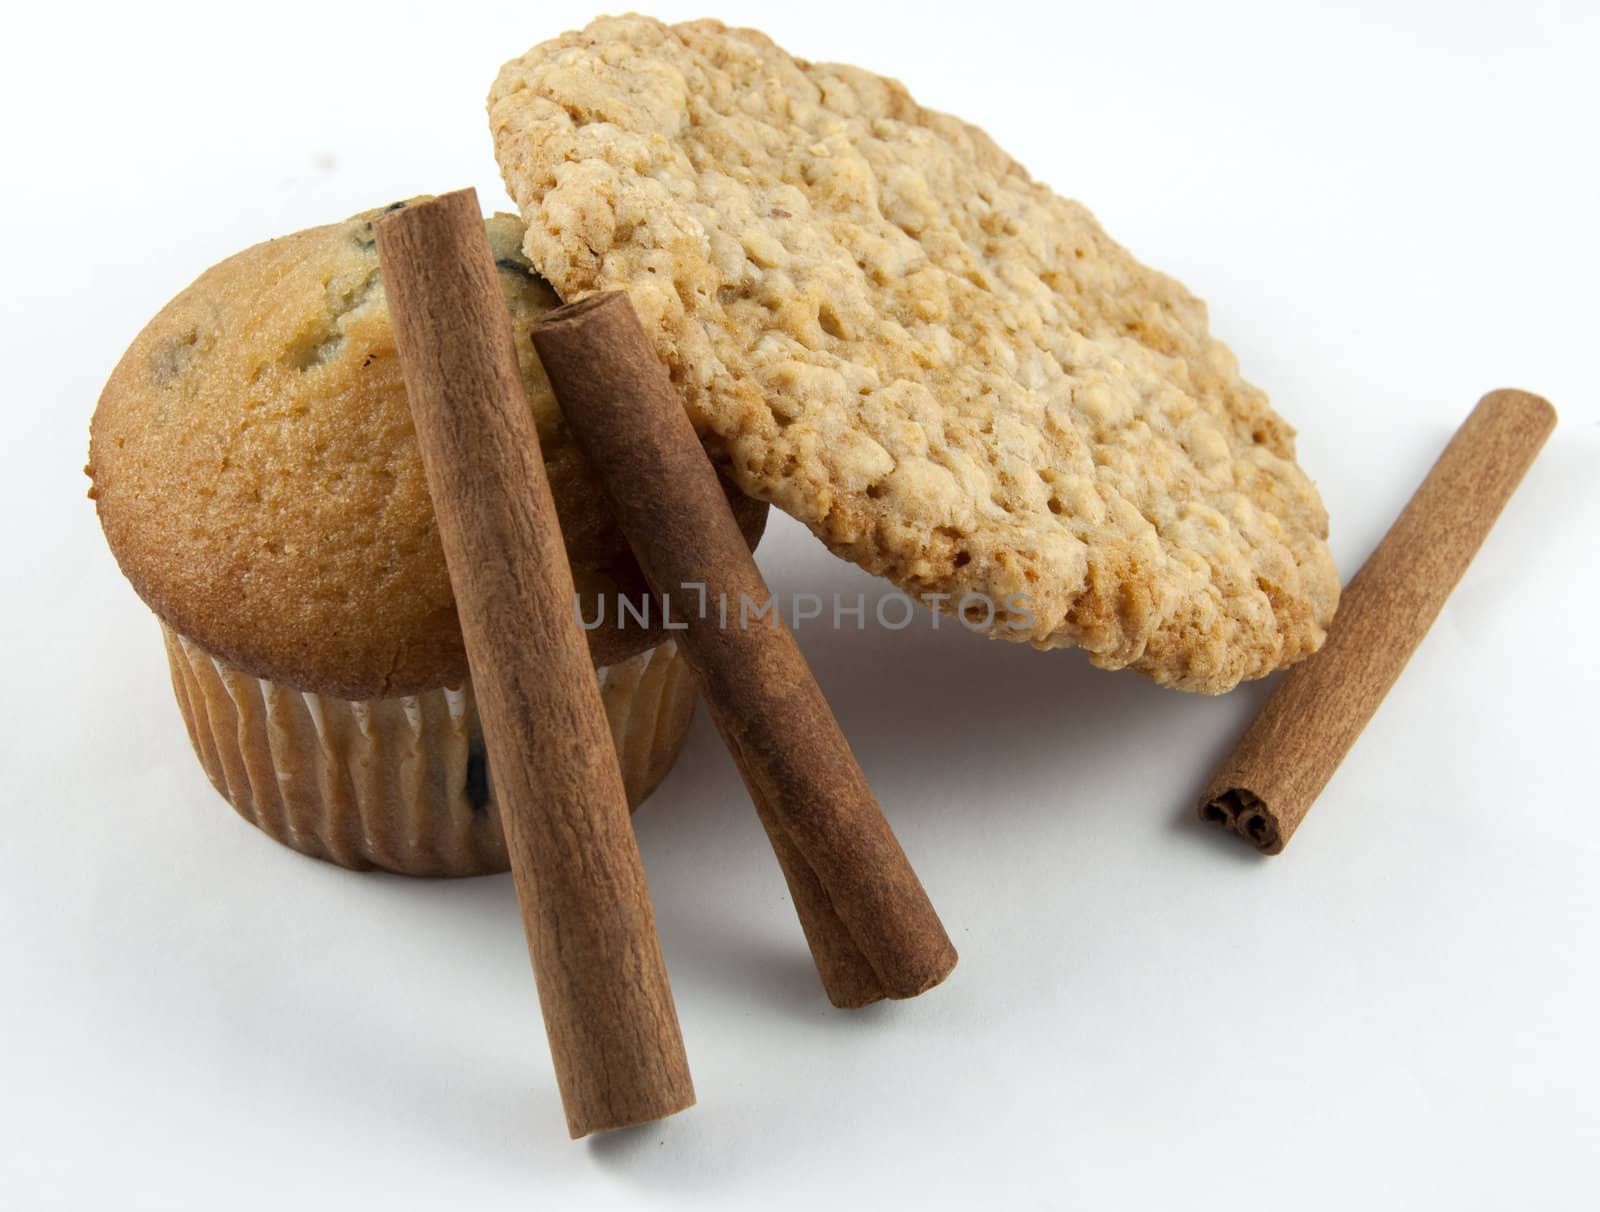 A blueberry muffin, and oatmeal cookie and cinnamon sticks.